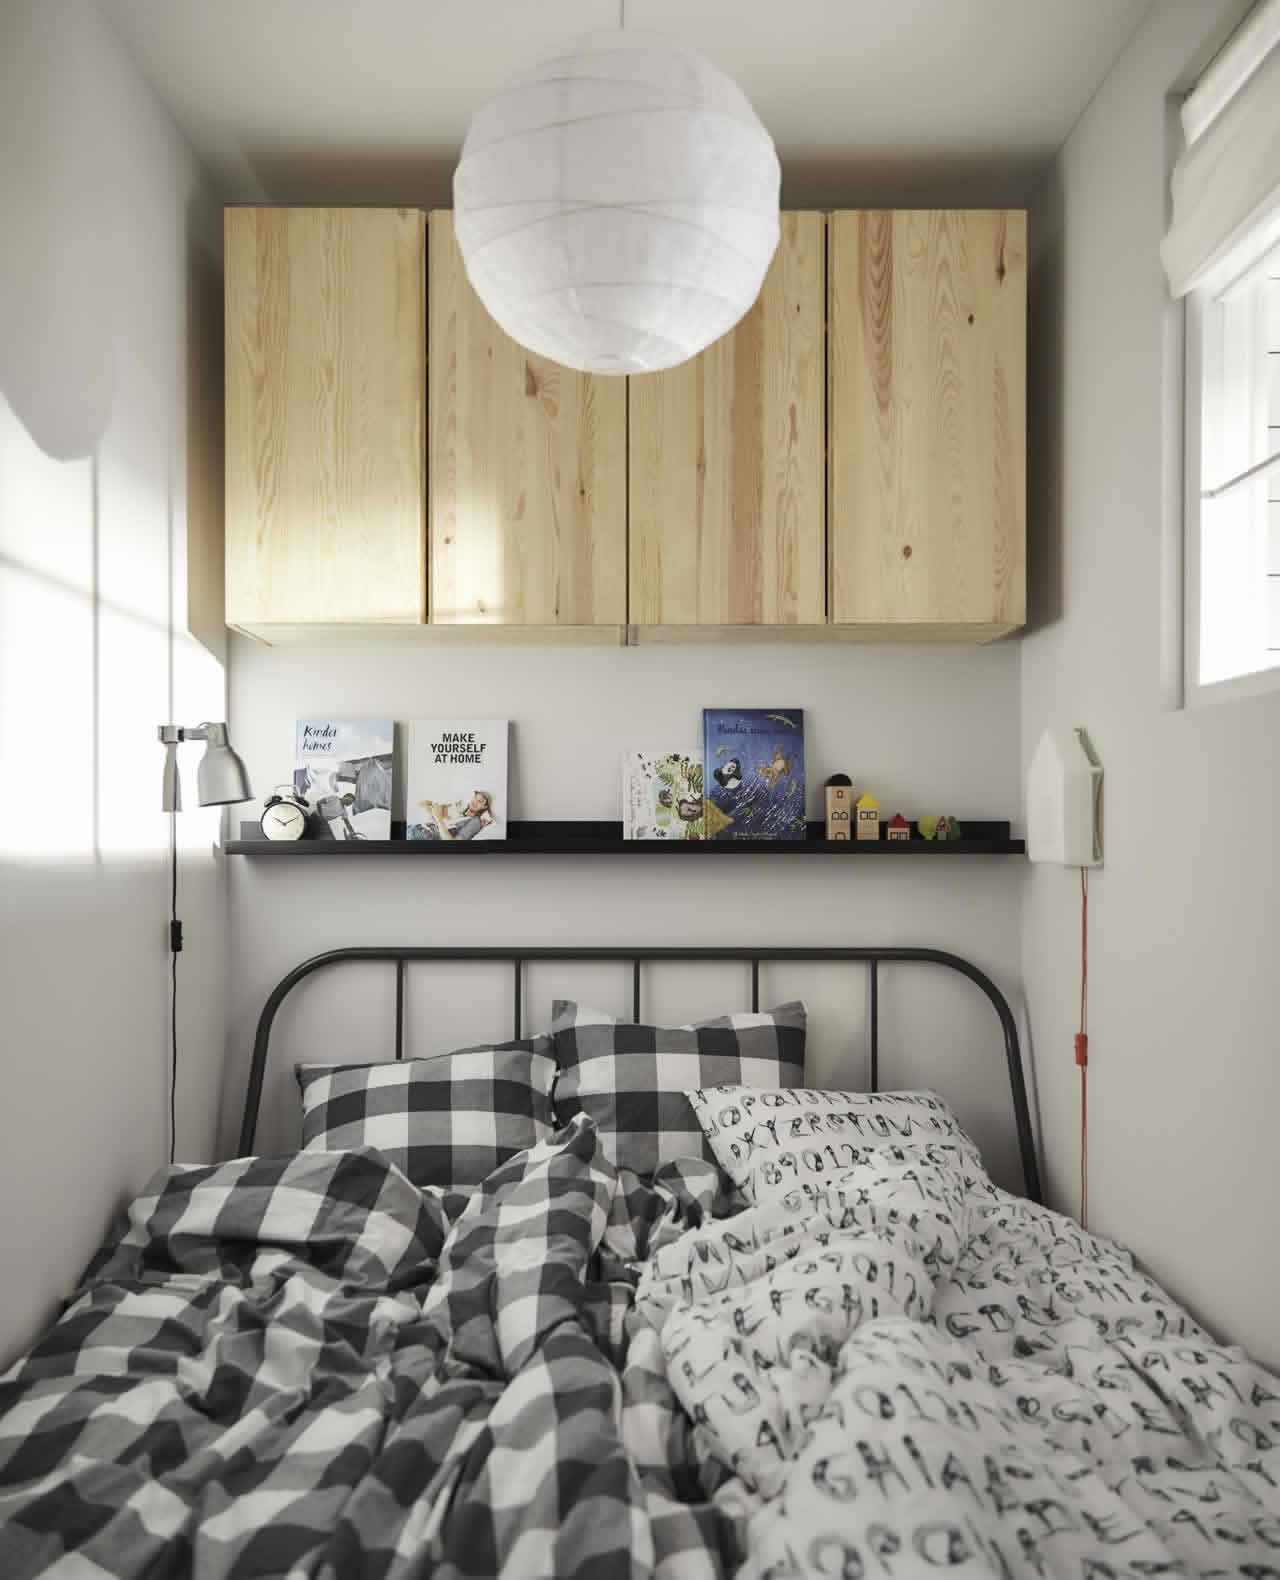 IKEA Ideas - A small-space home for big dude and little dude